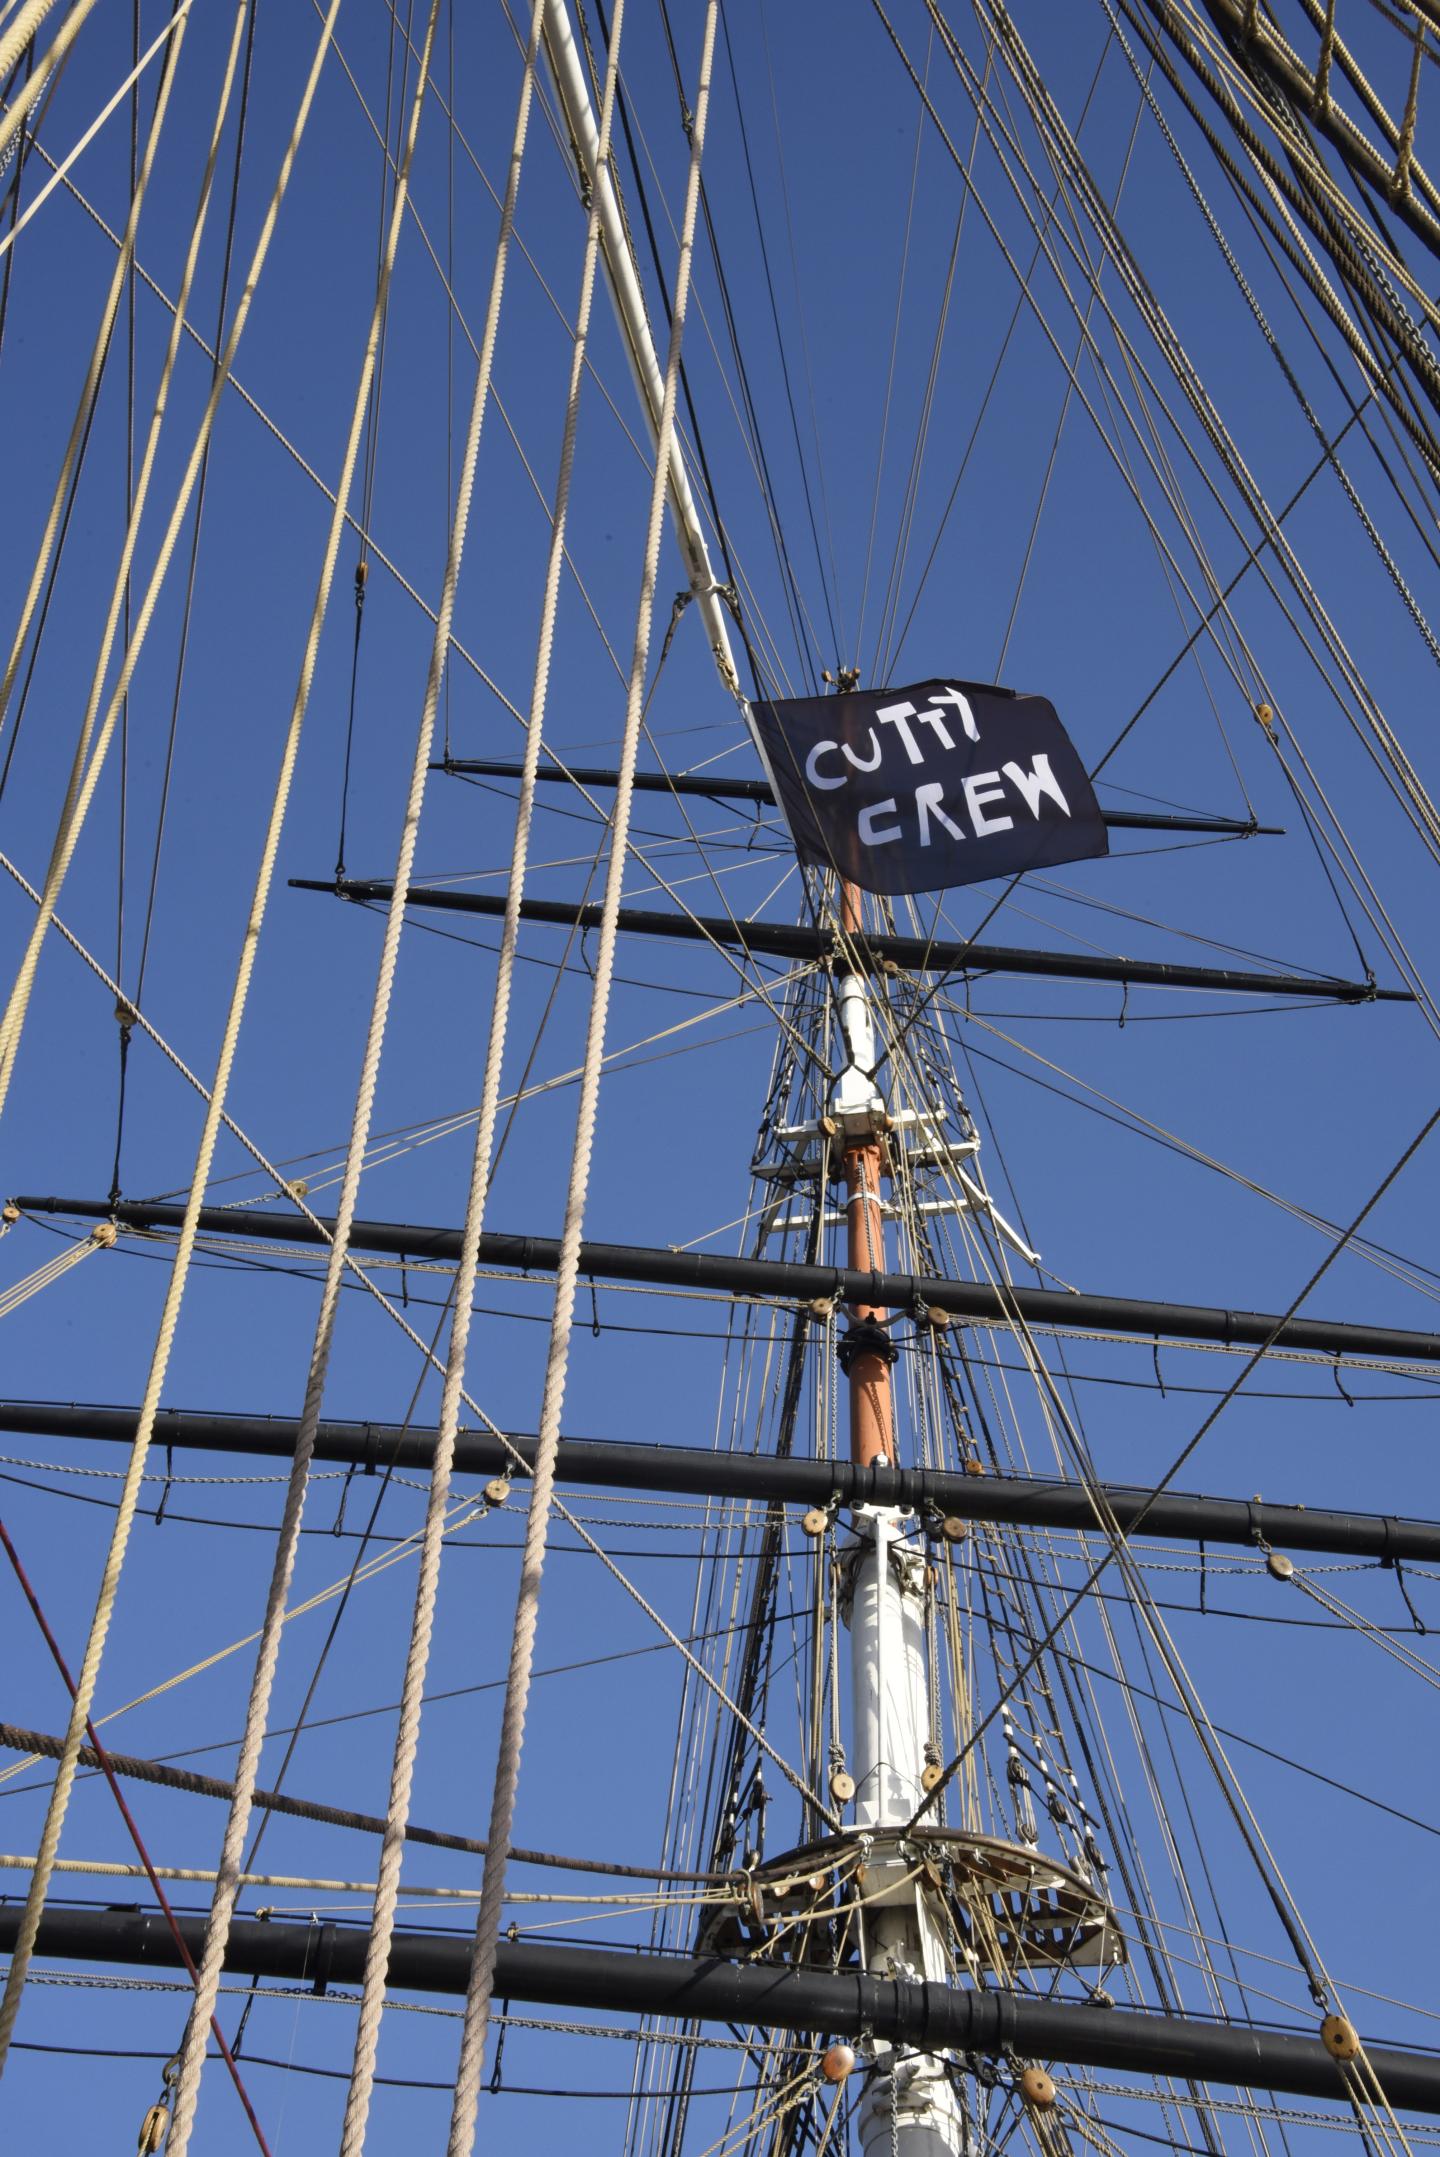 Flag on the Cutty Sark that reads Cutty Crew